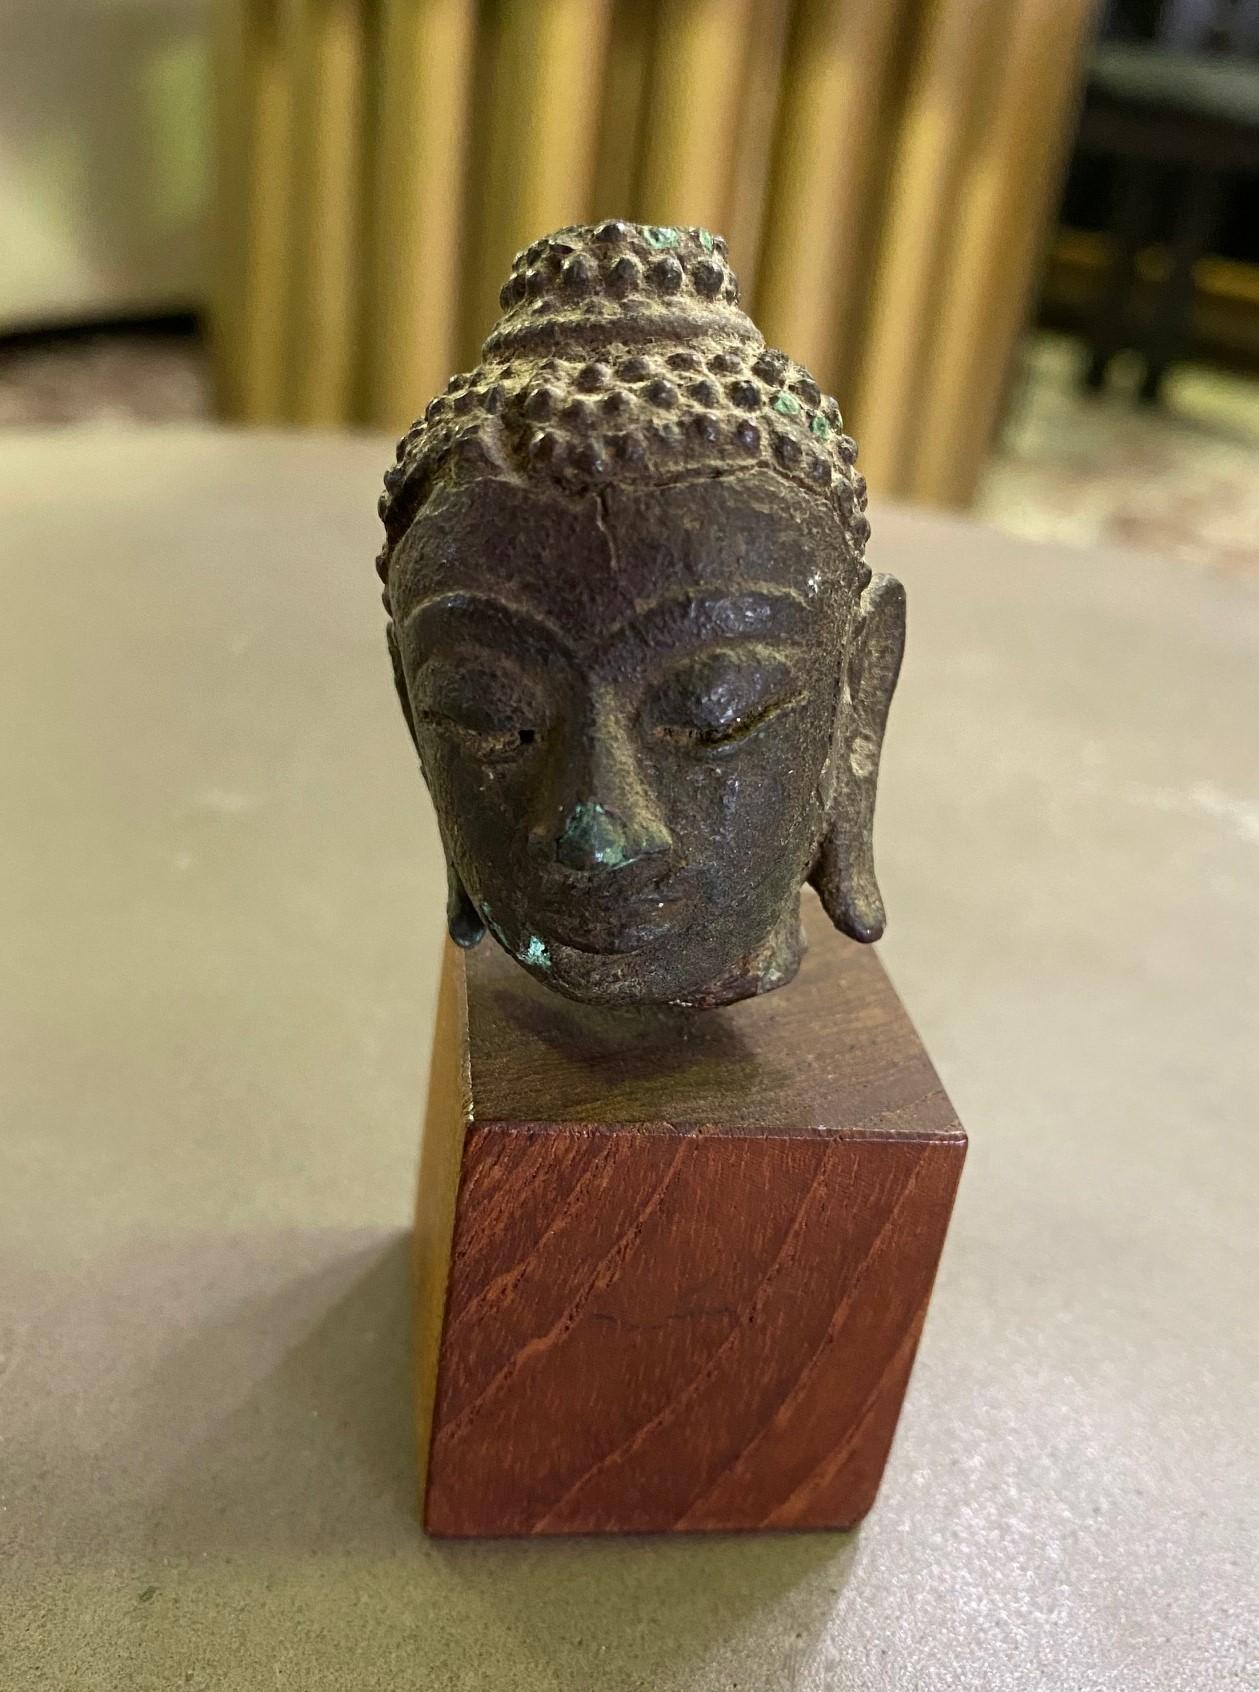 A wonderful, little gem of a piece. Thai/ Siam meditating buddha with serenely closed eyes in the Kamphaeng Phet style. The piece has a beautiful patina acquired over time. 

From a collection of Asian antiques. Would make for a nice addition to